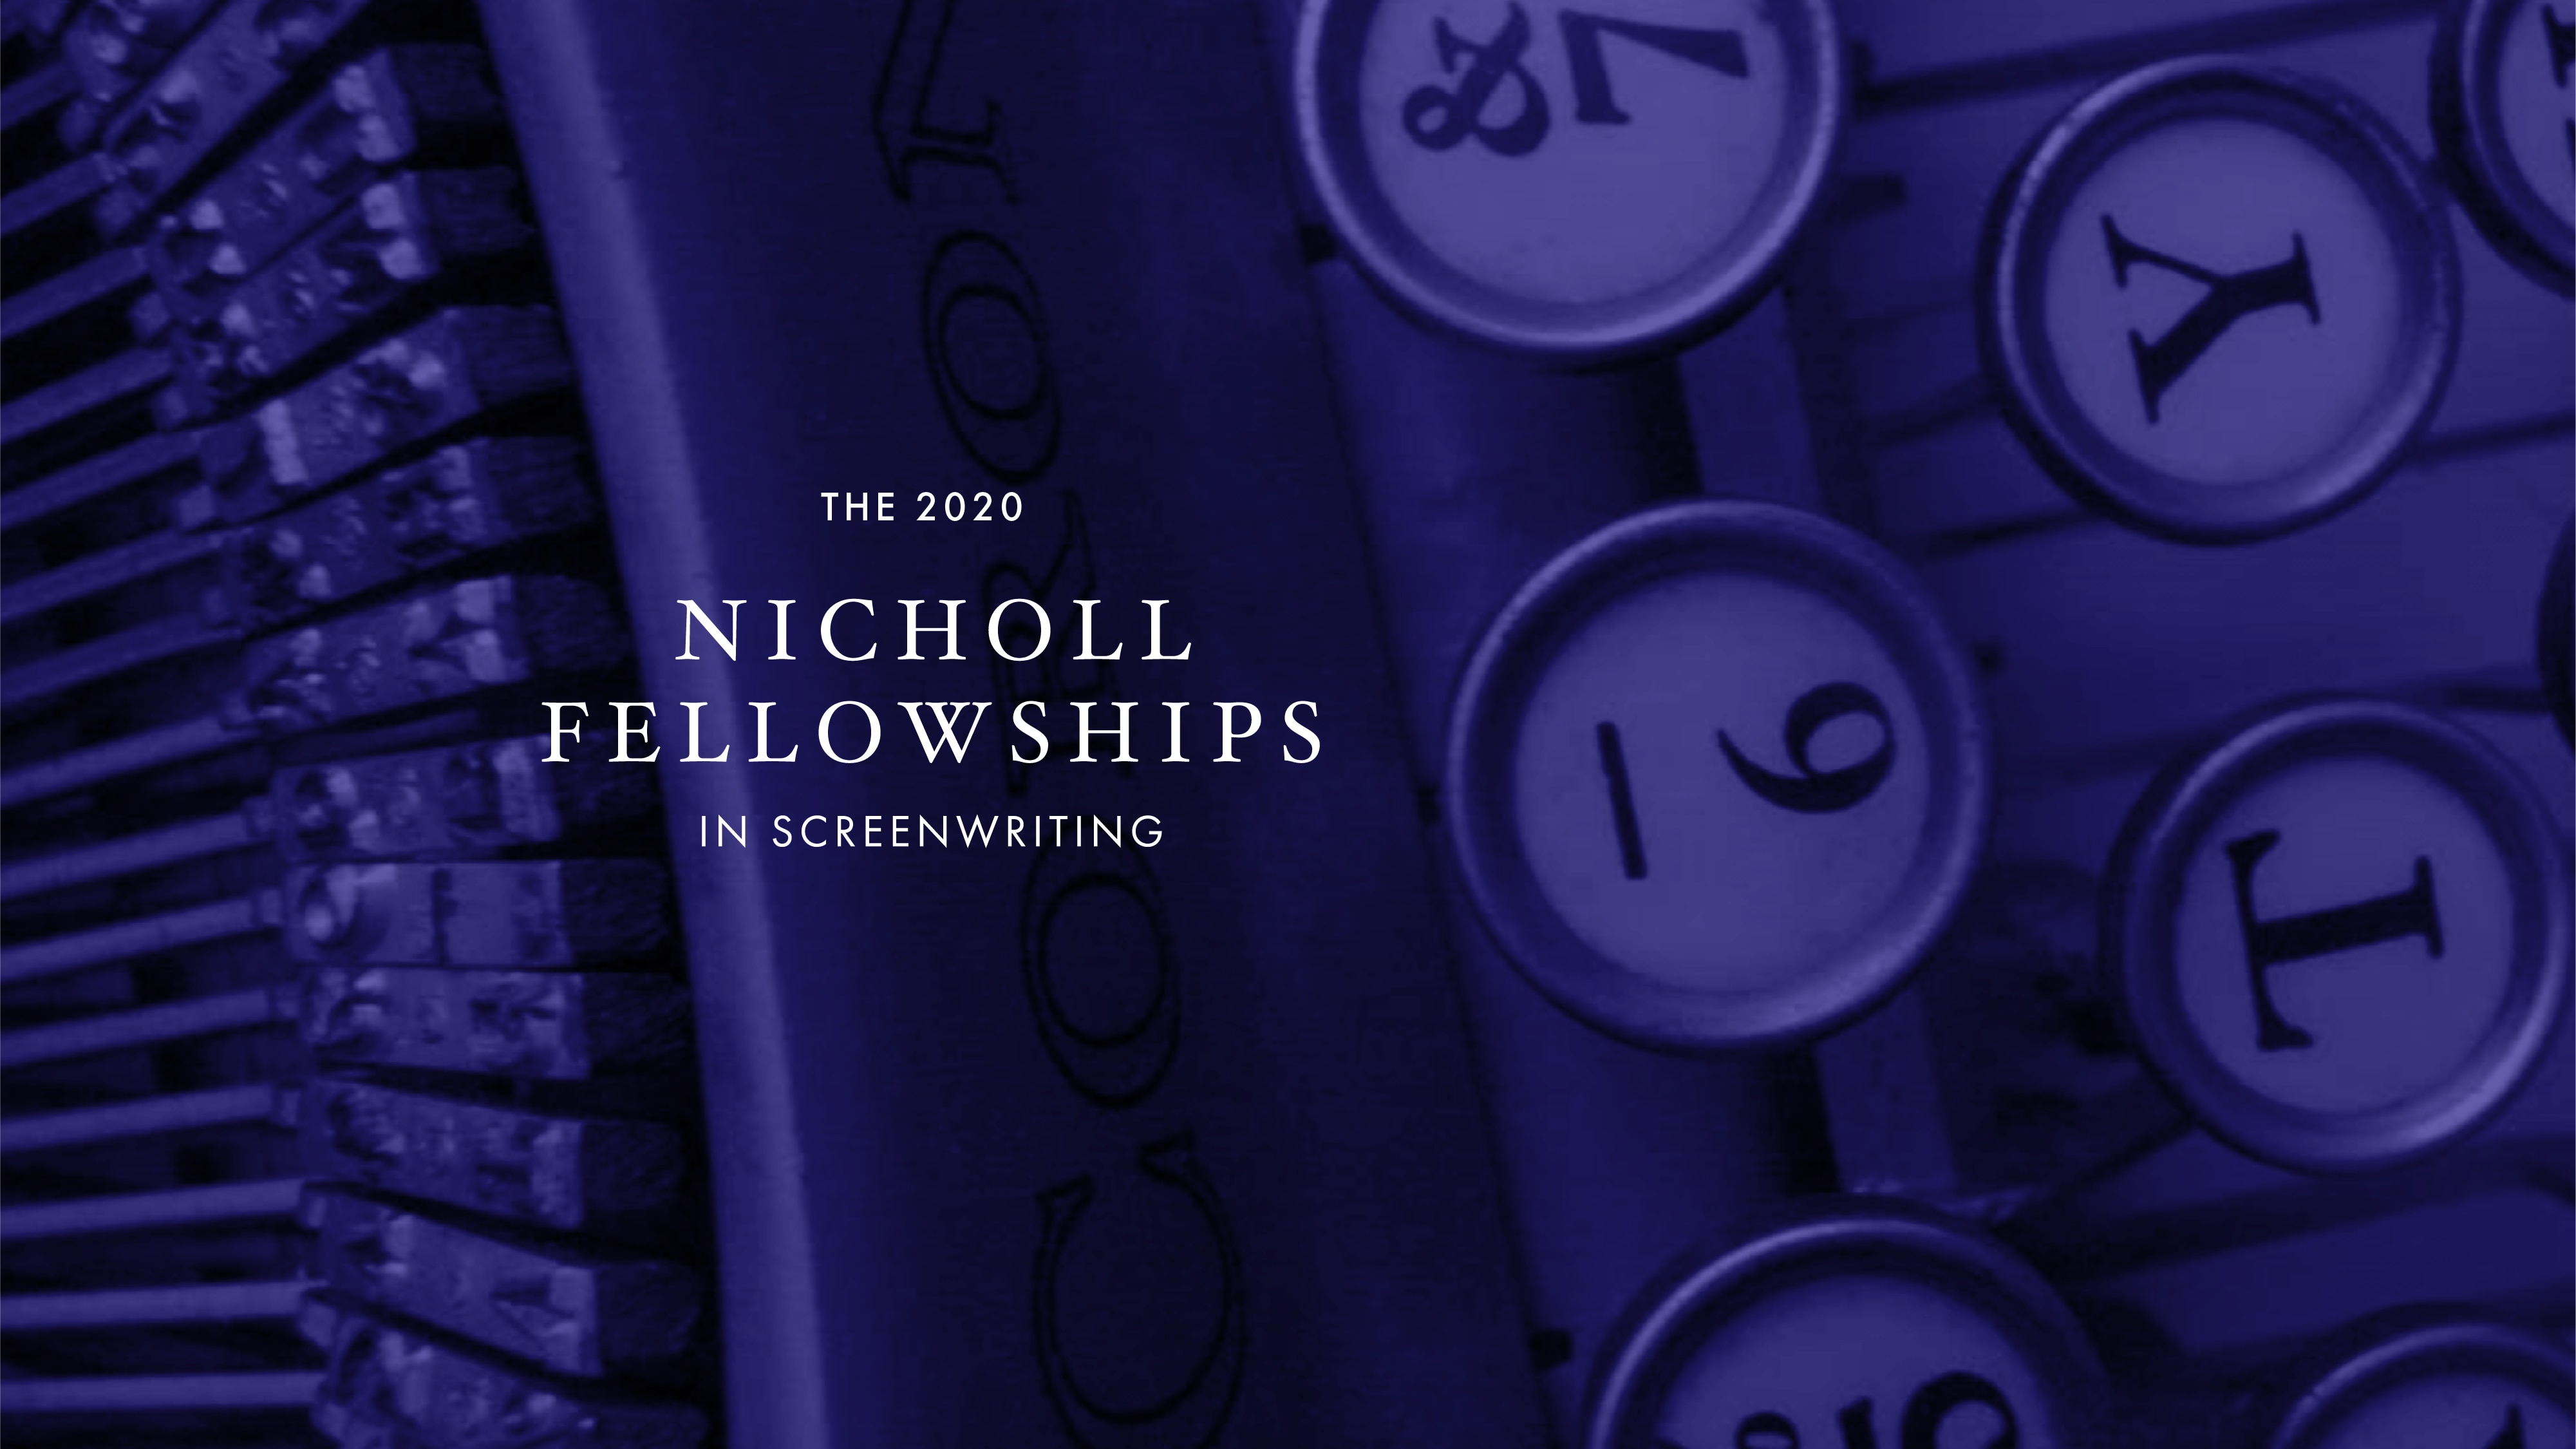 MEET THE 2020 NICHOLL FELLOWSHIP FINALISTS Academy of Motion Picture Arts and